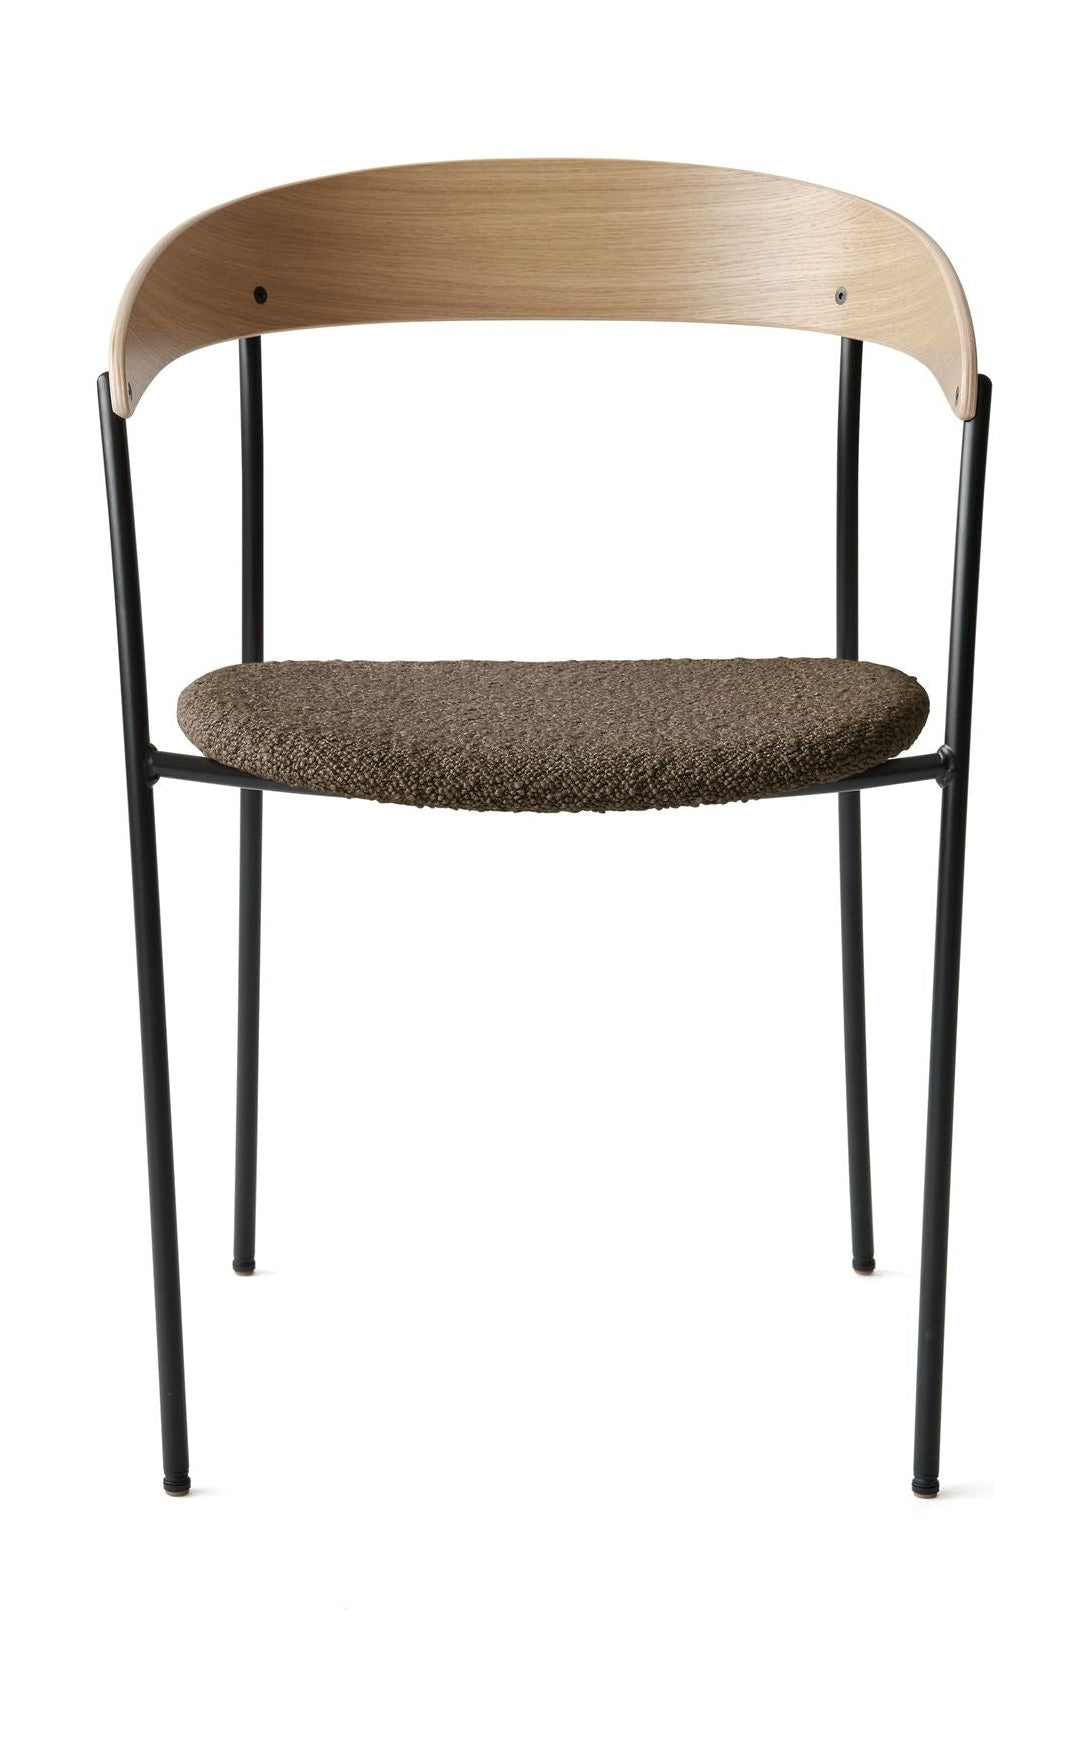 New Works Chêne en fauteuil manquant, taupe sombre